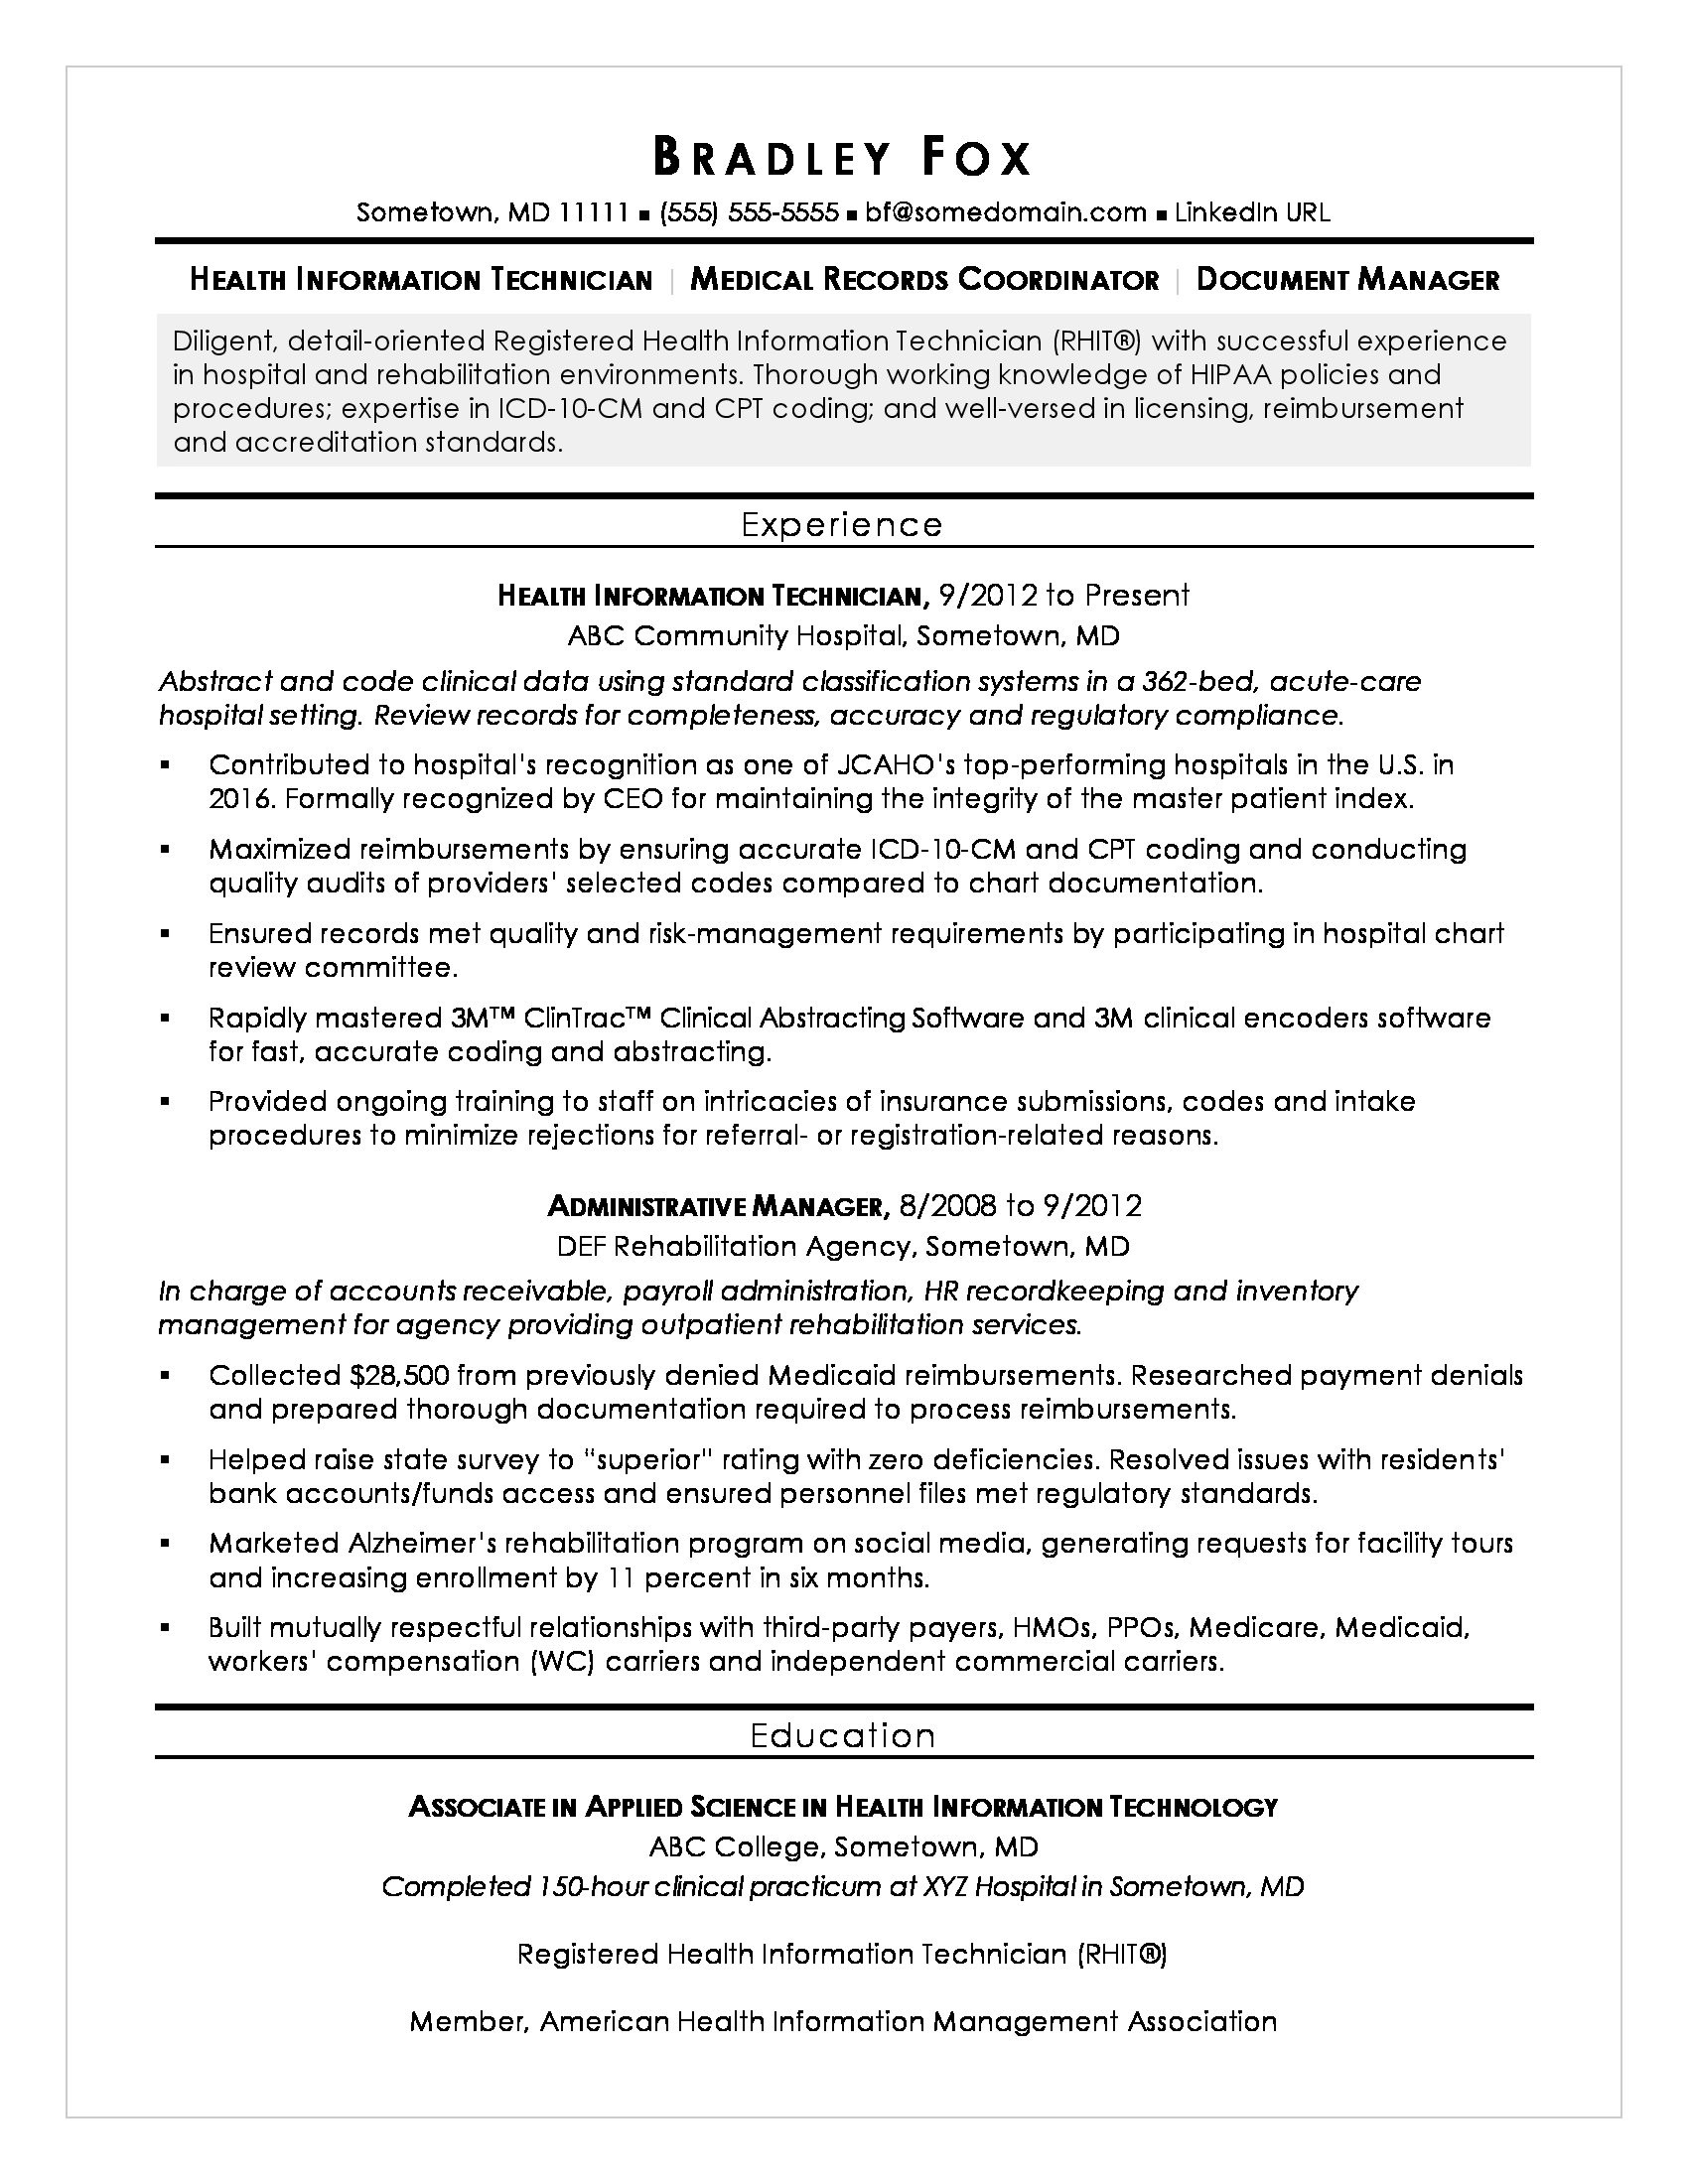 Resume Template for A Lot Of Information Health Information Technician Sample Resume Monster.com